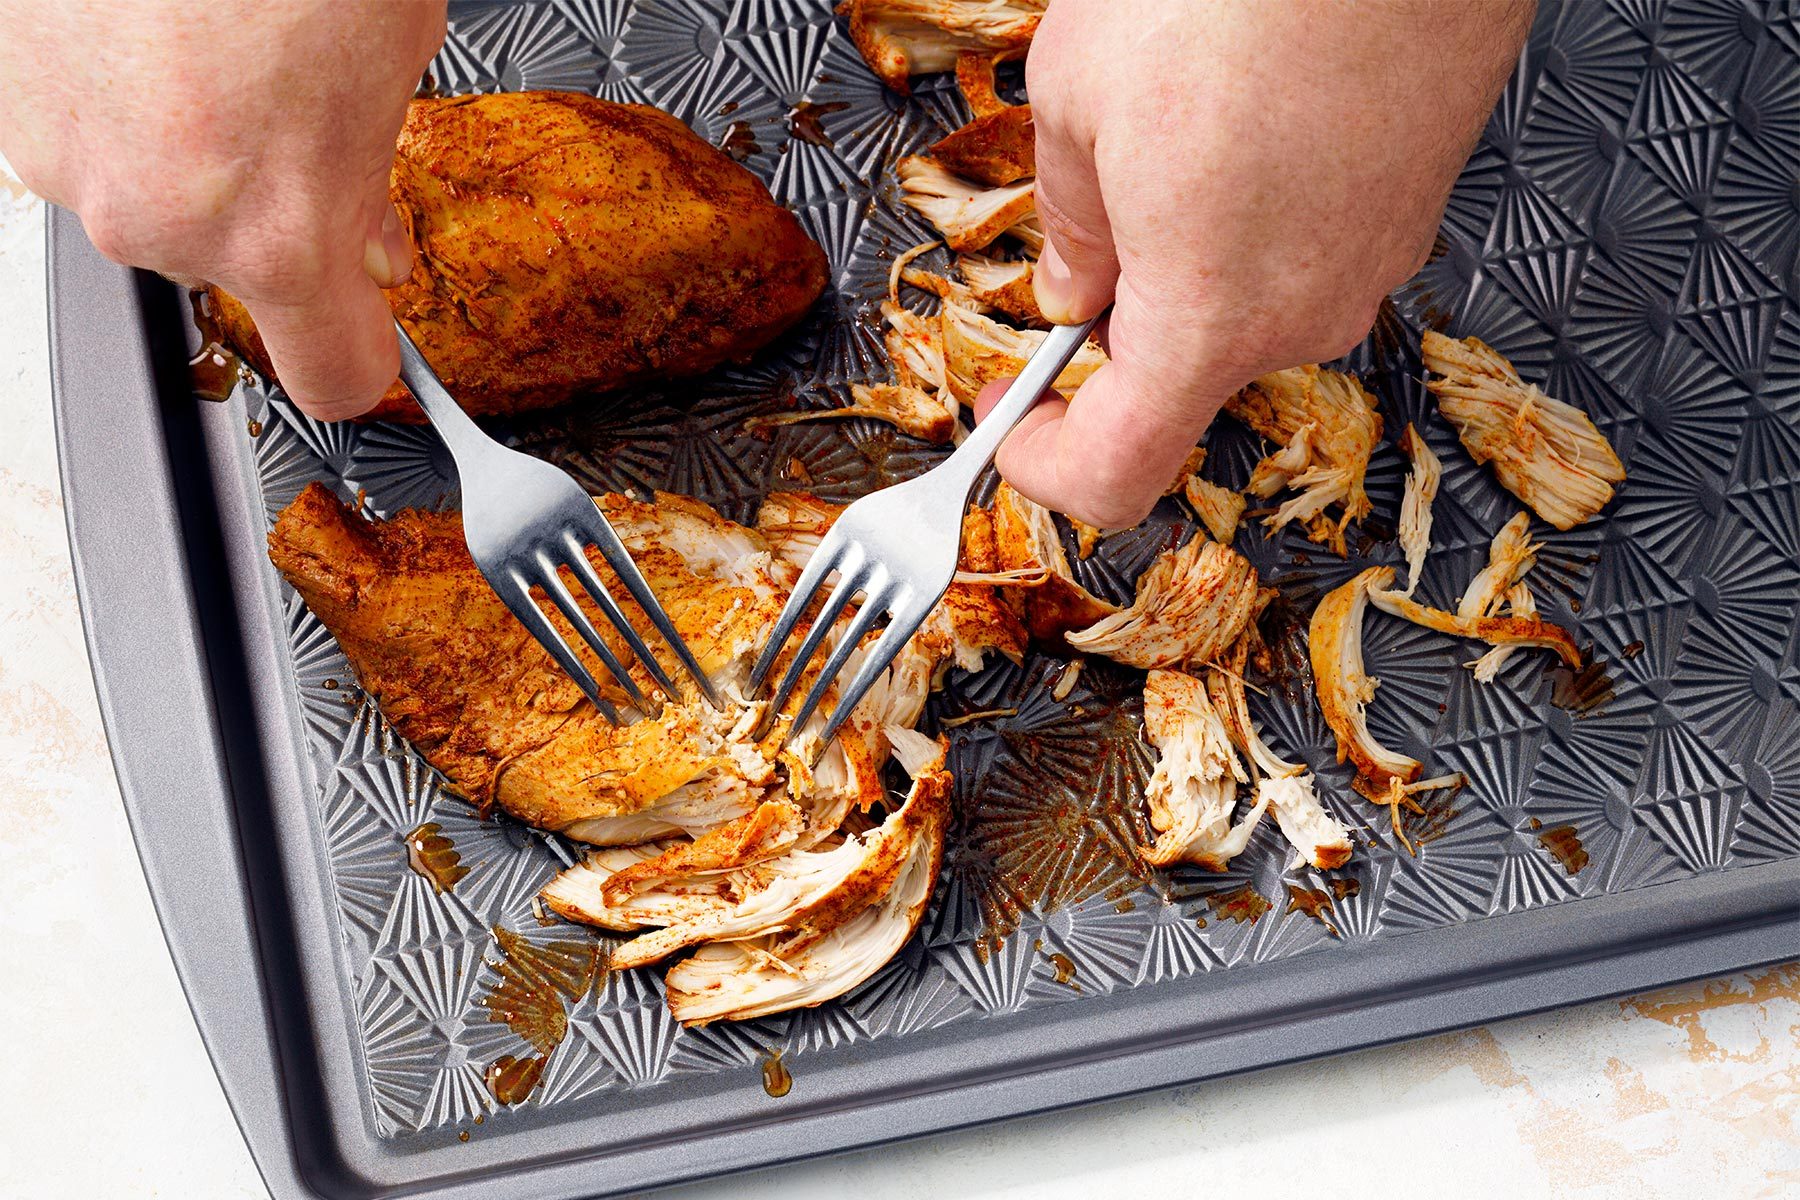 Shredding chicken with forks on baking tray